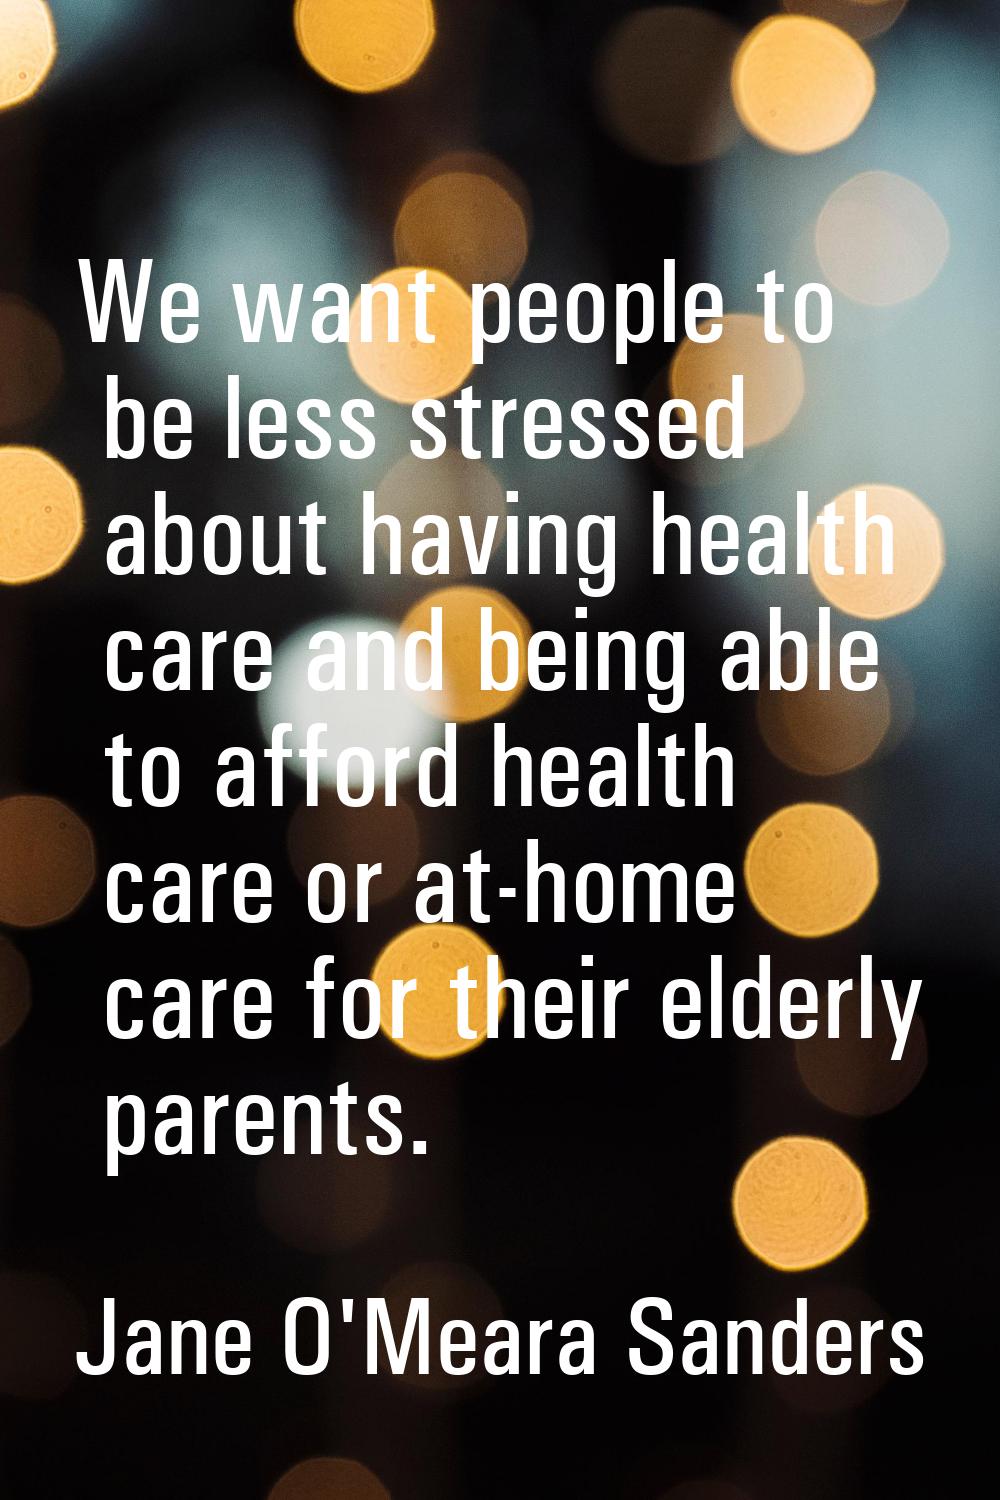 We want people to be less stressed about having health care and being able to afford health care or